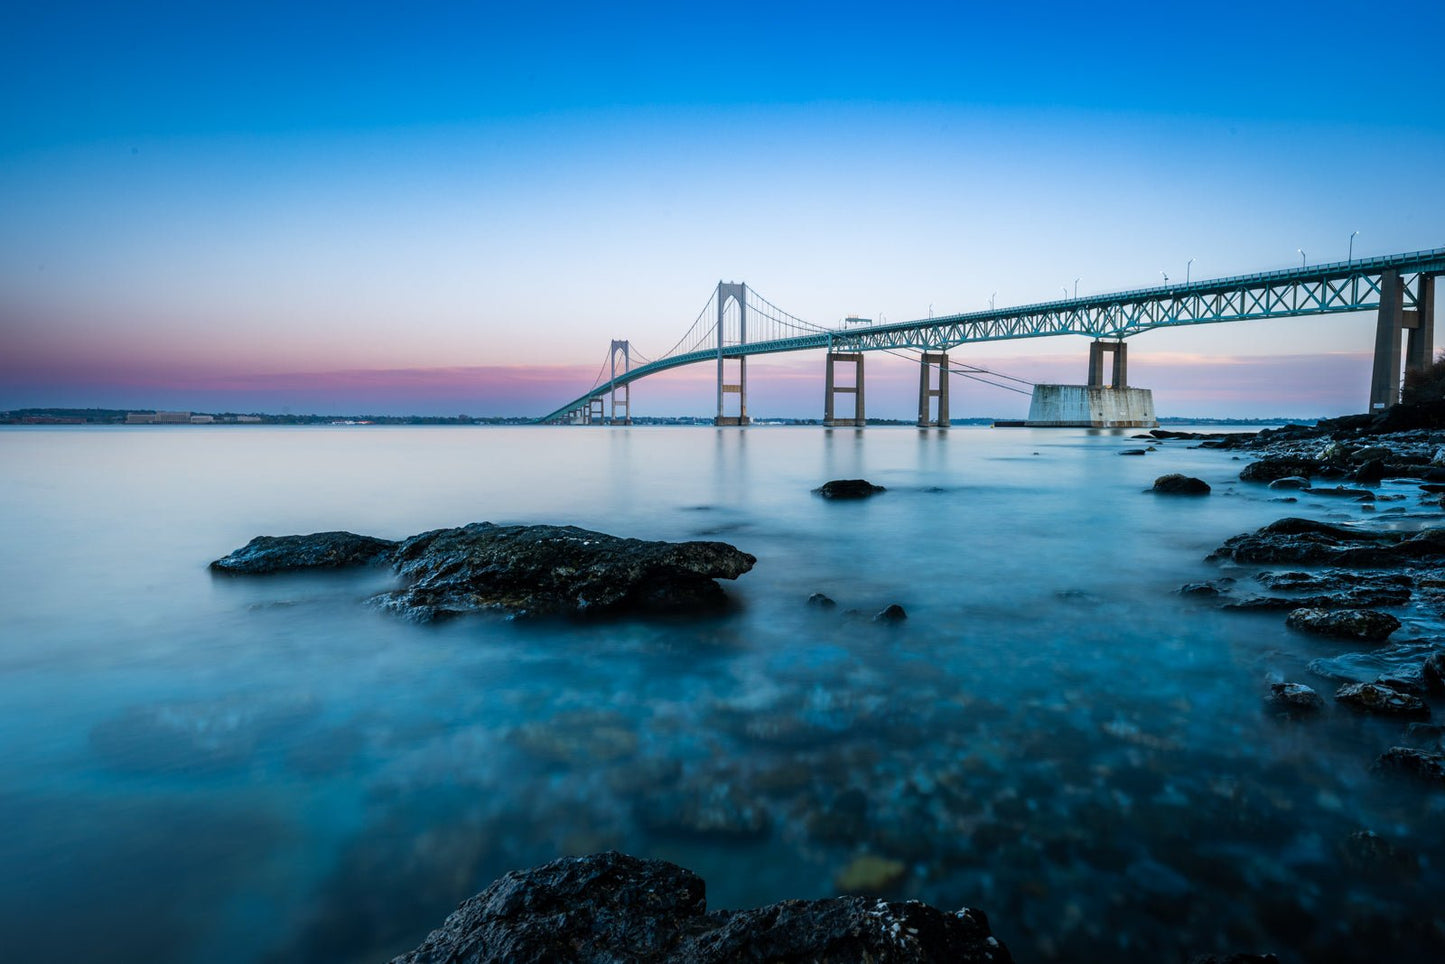 "Blue Hour on the Bay" - Allie Richards Photography